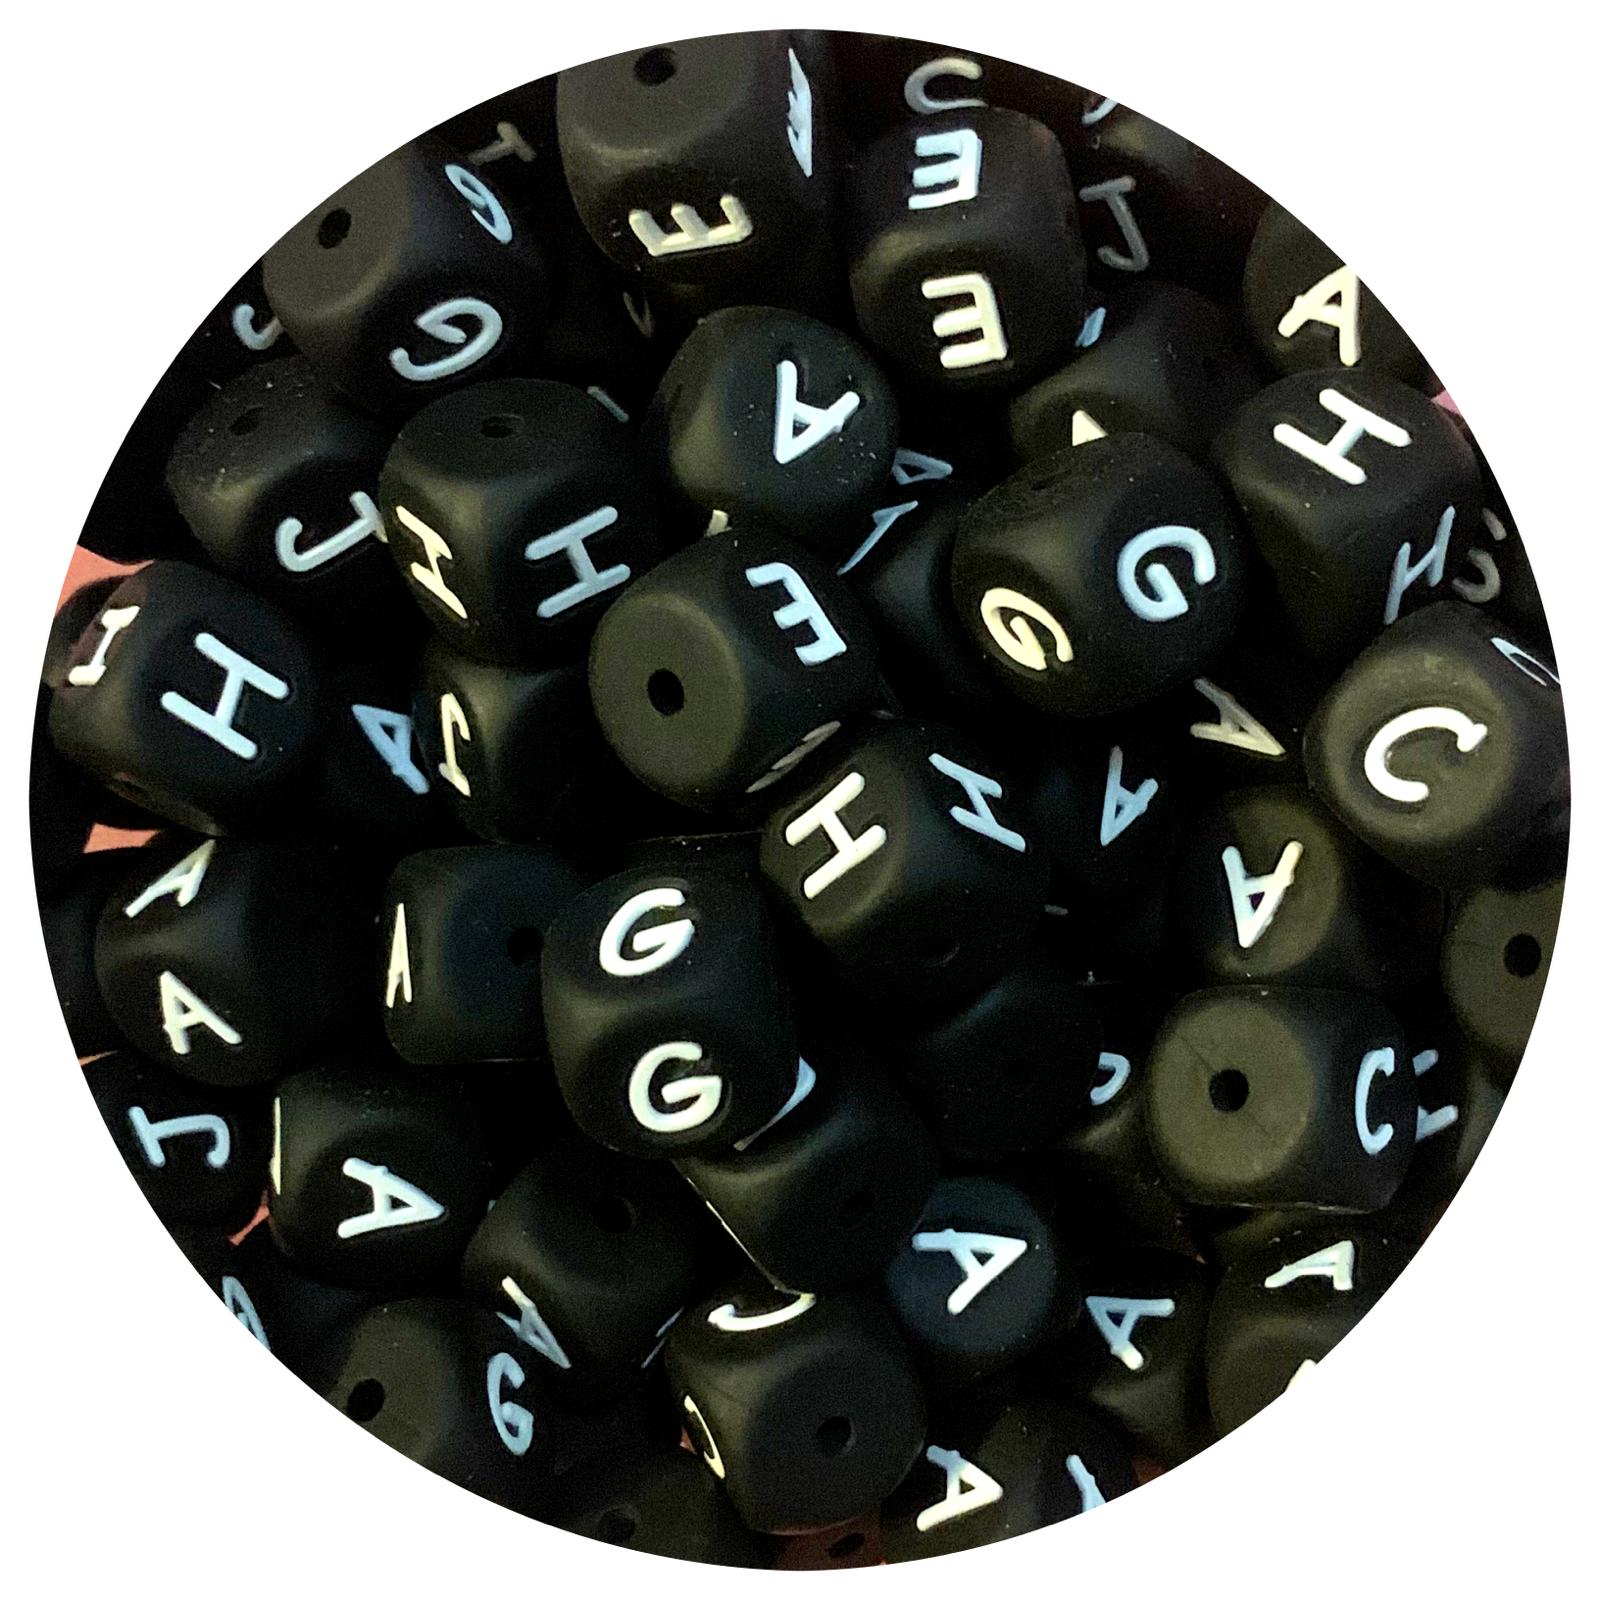 12mm Black Silicone Letter Beads MIXED PACK - 50 beads